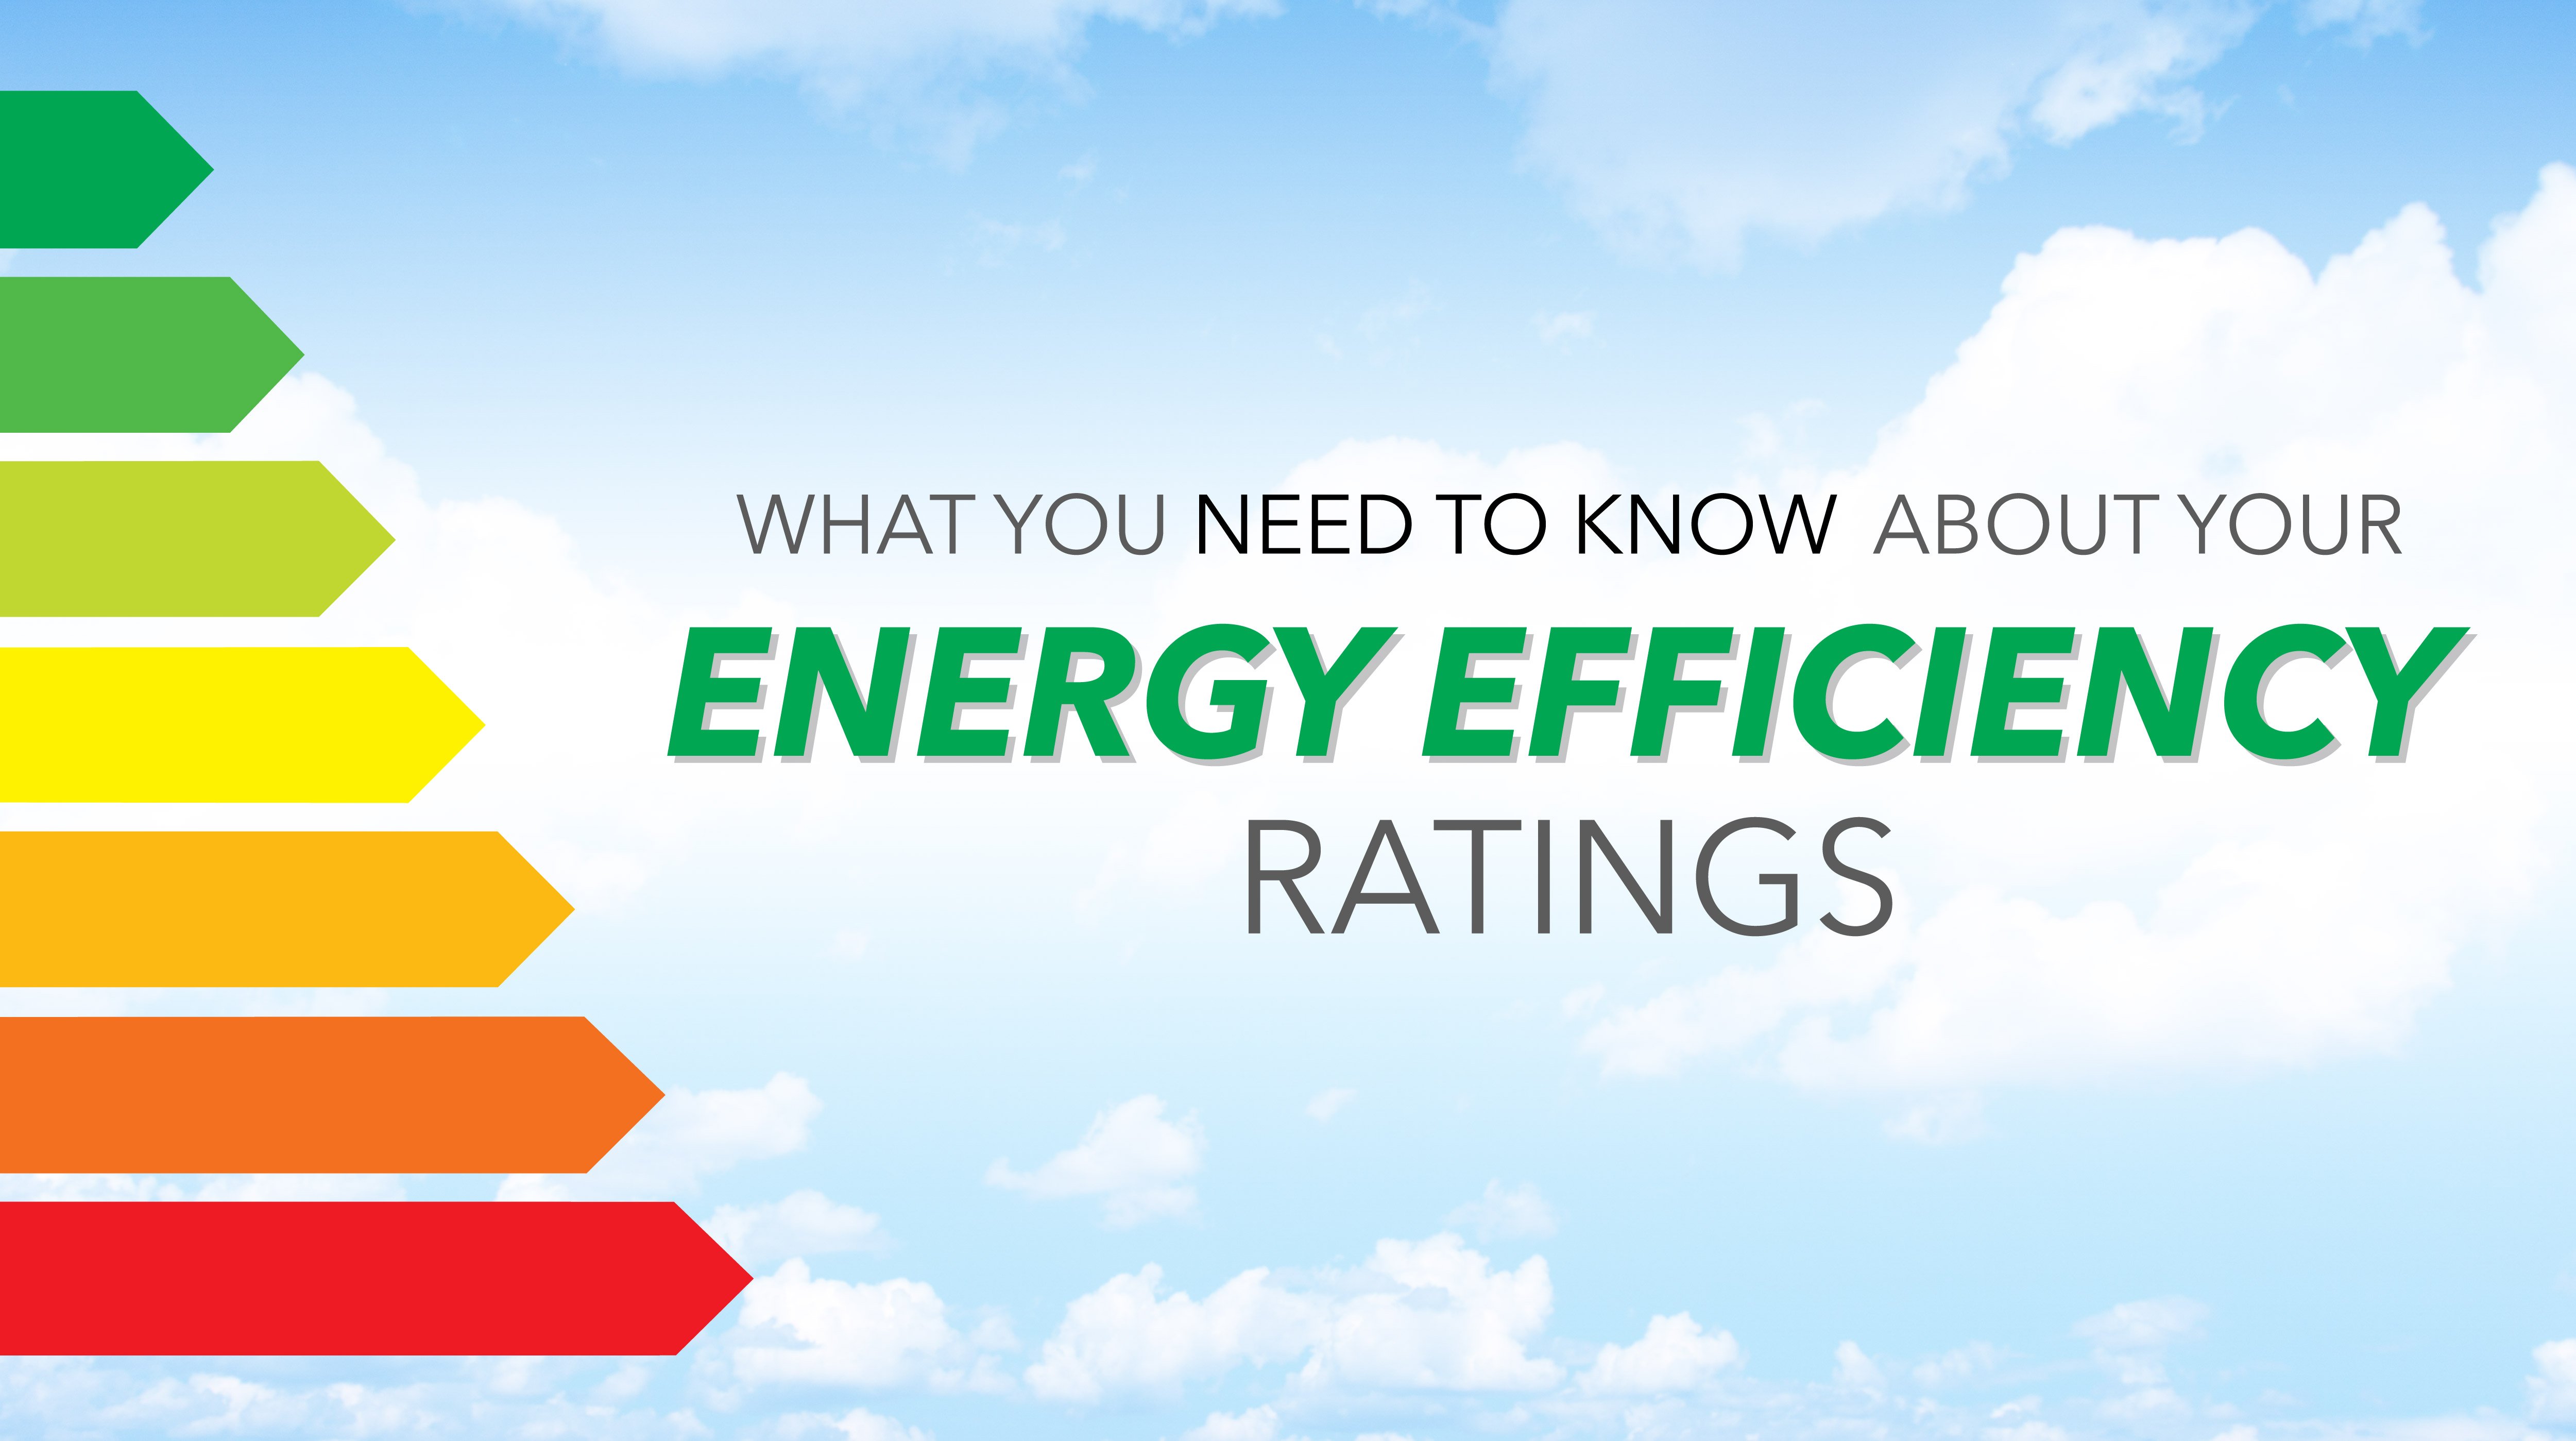 What You Need to Know About Your Energy Efficiency Ratings